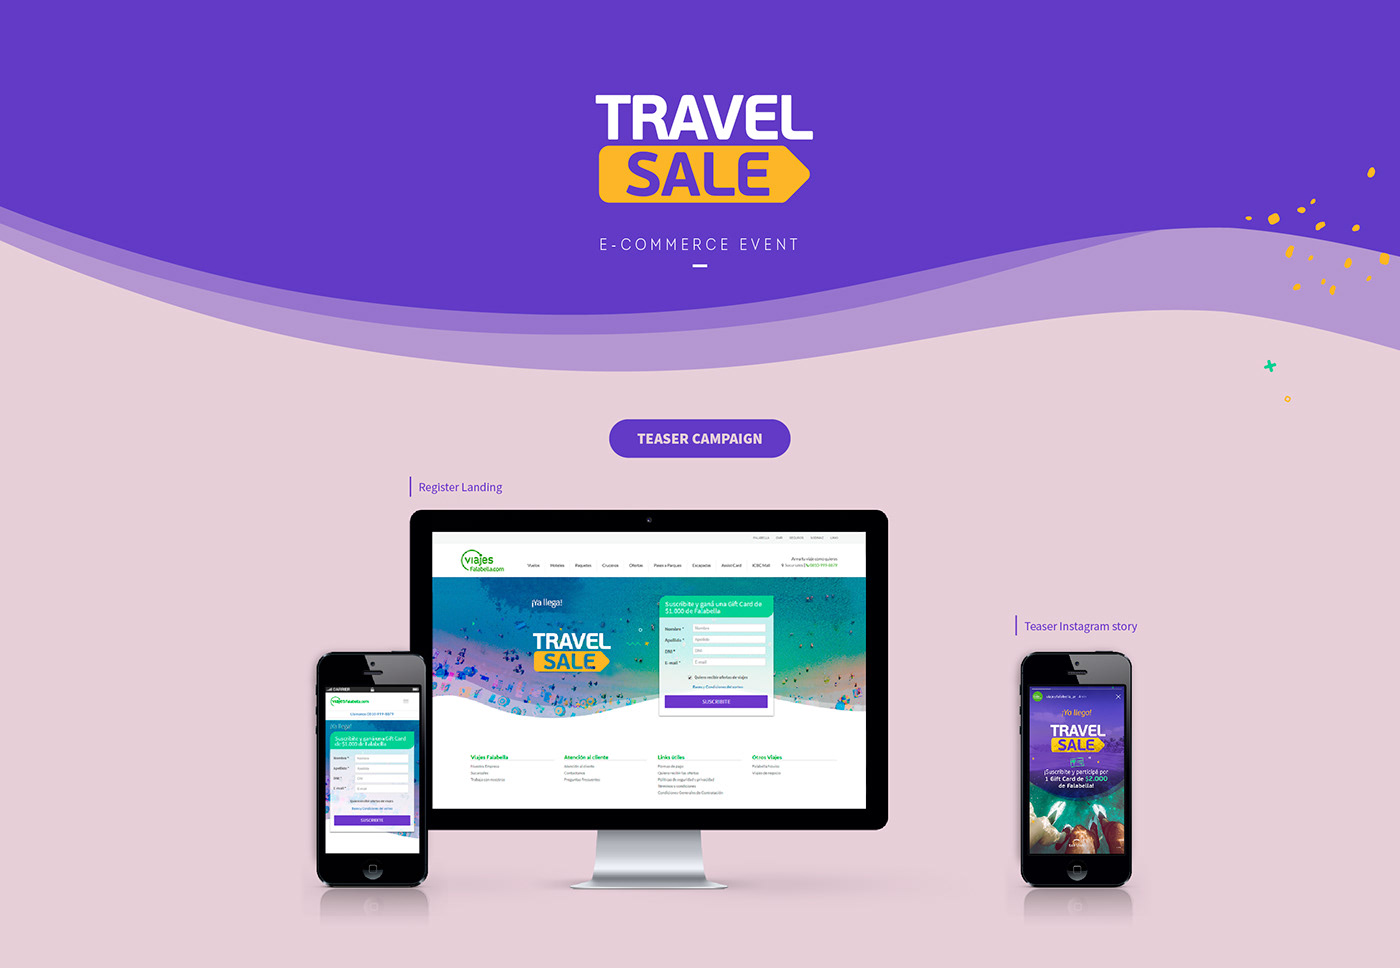 digital design travel sale graphic design  travel agency email marketing social media landing page Advertising  marketing campaign visual identity